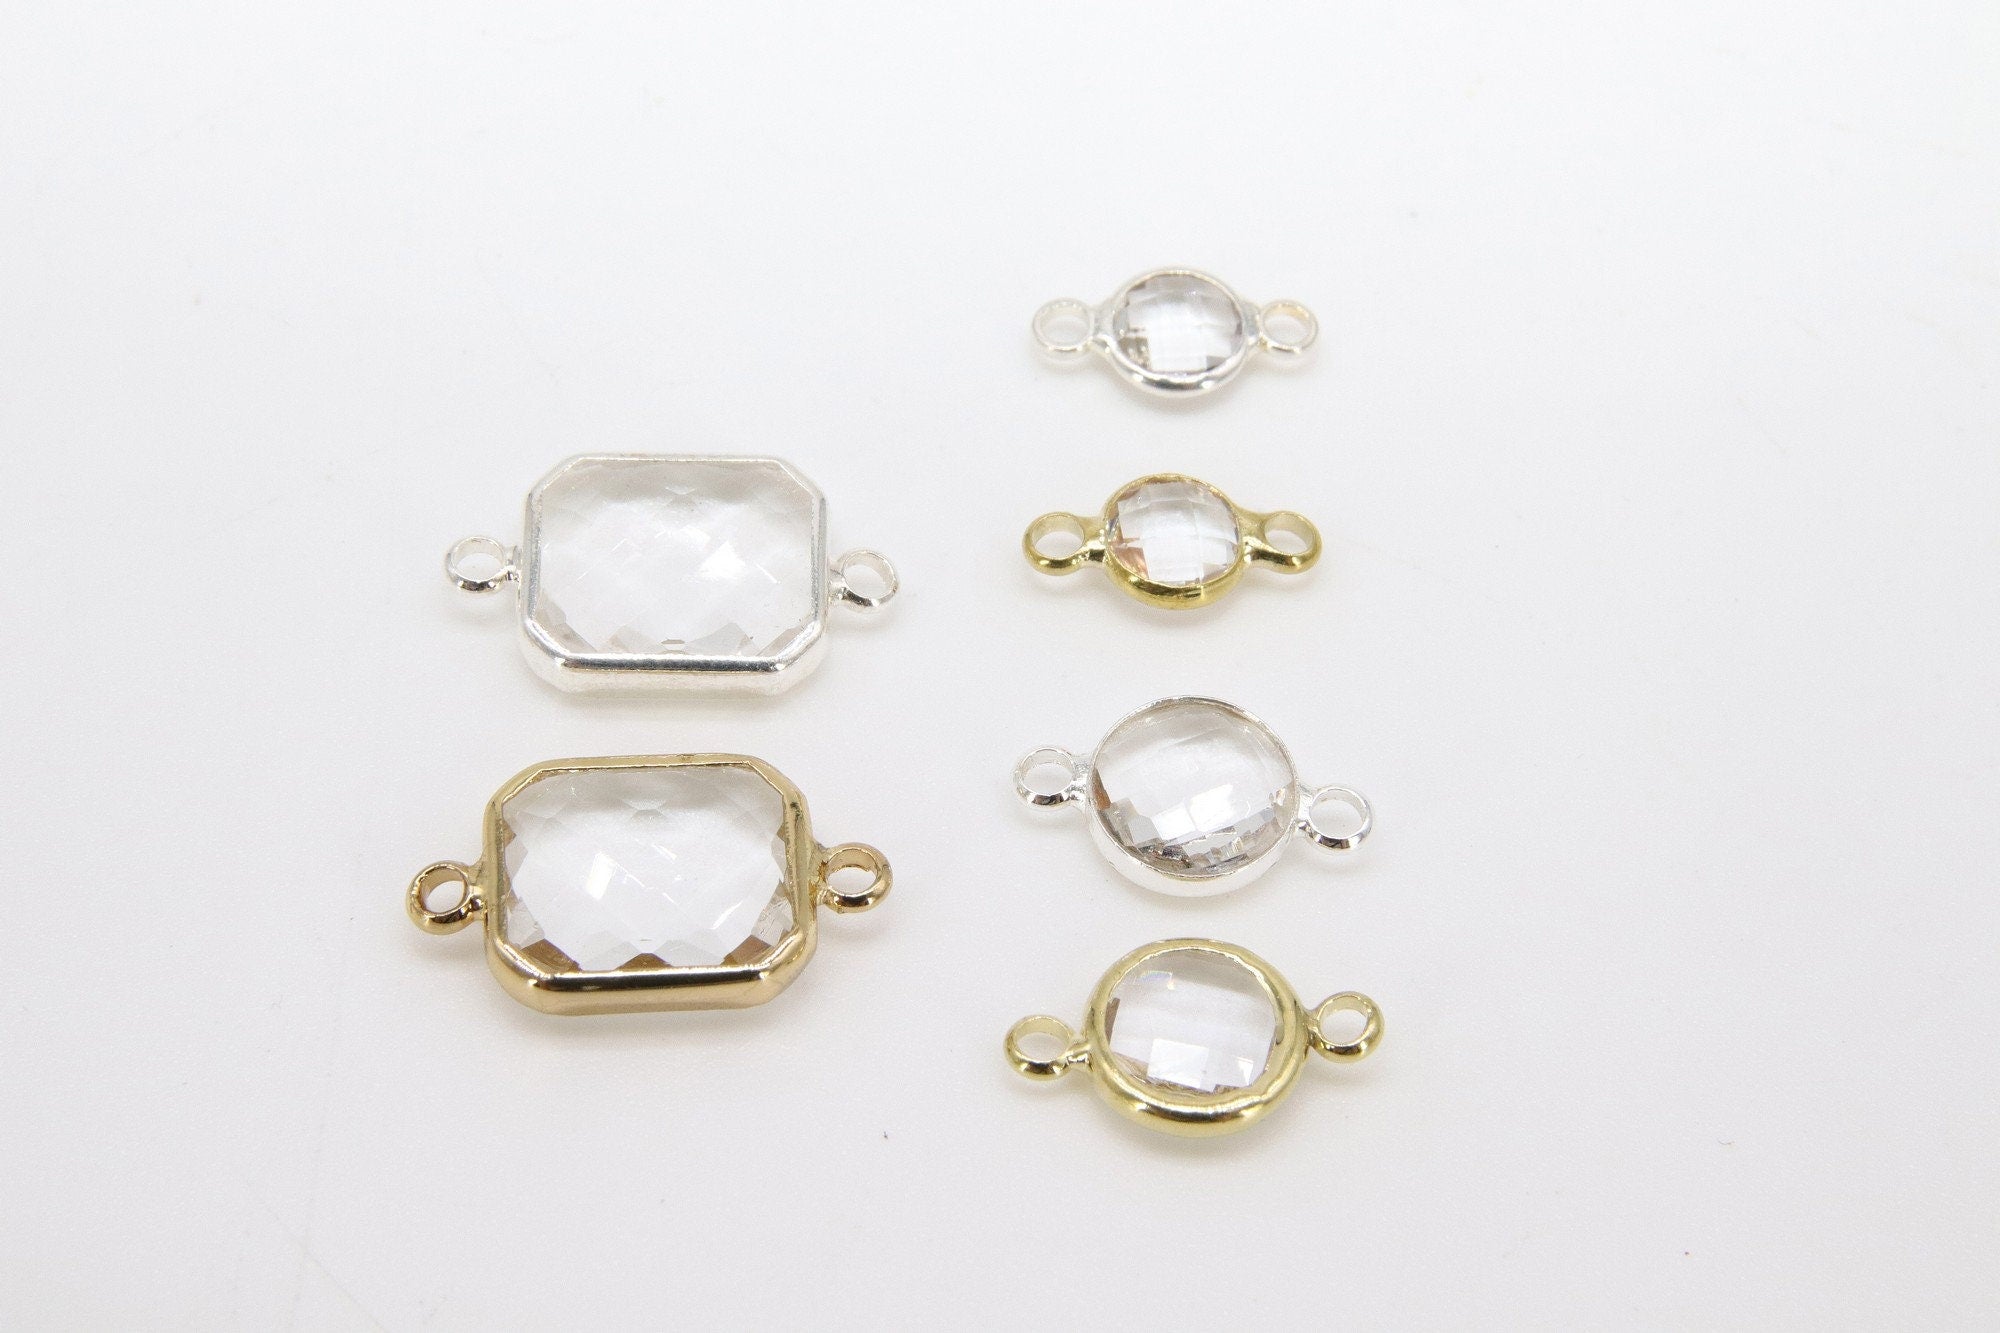 Round 6 mm Connectors, 2 Pcs Rectangle Gold or Silver 8 mm Charms and Links for DIY Earrings #649, Bracelet